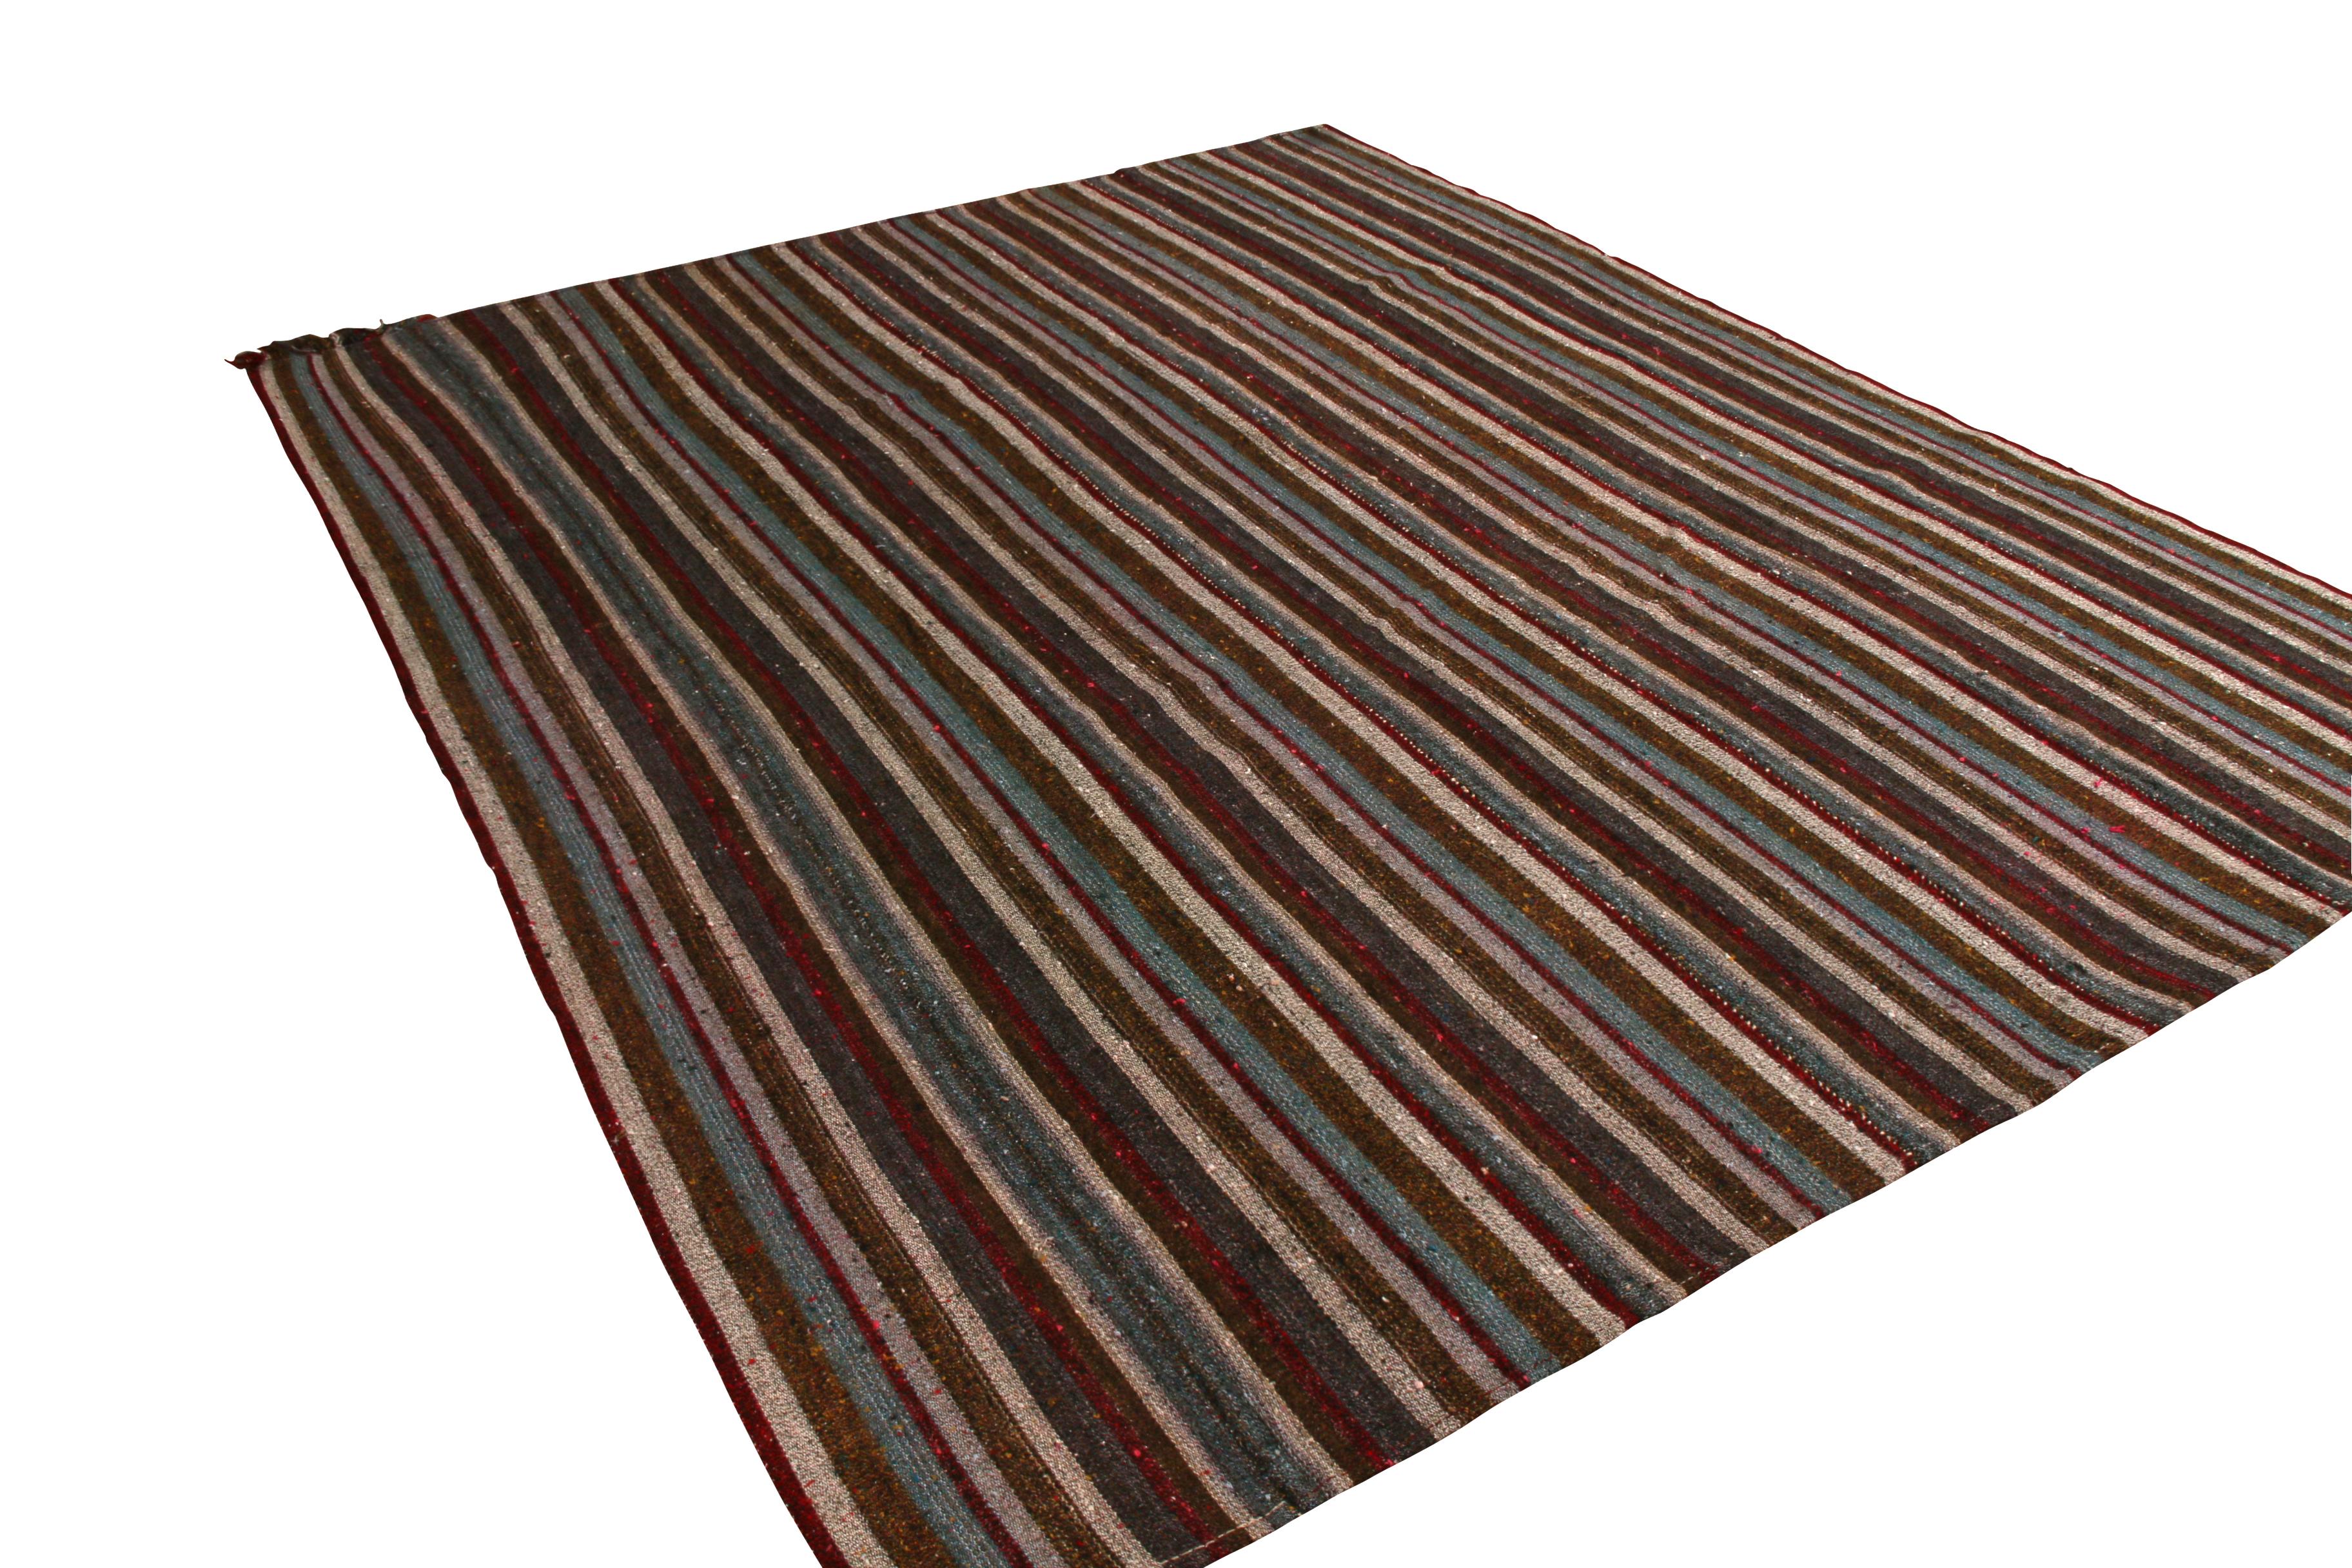 Handwoven in wool originating from Turkey between 1950-1960, this vintage mid-century Kilim enjoys one of the most subtle employments of a richer colorway among our recent acquisitions of this venerated style of paneled flat-weave rugs. The richness